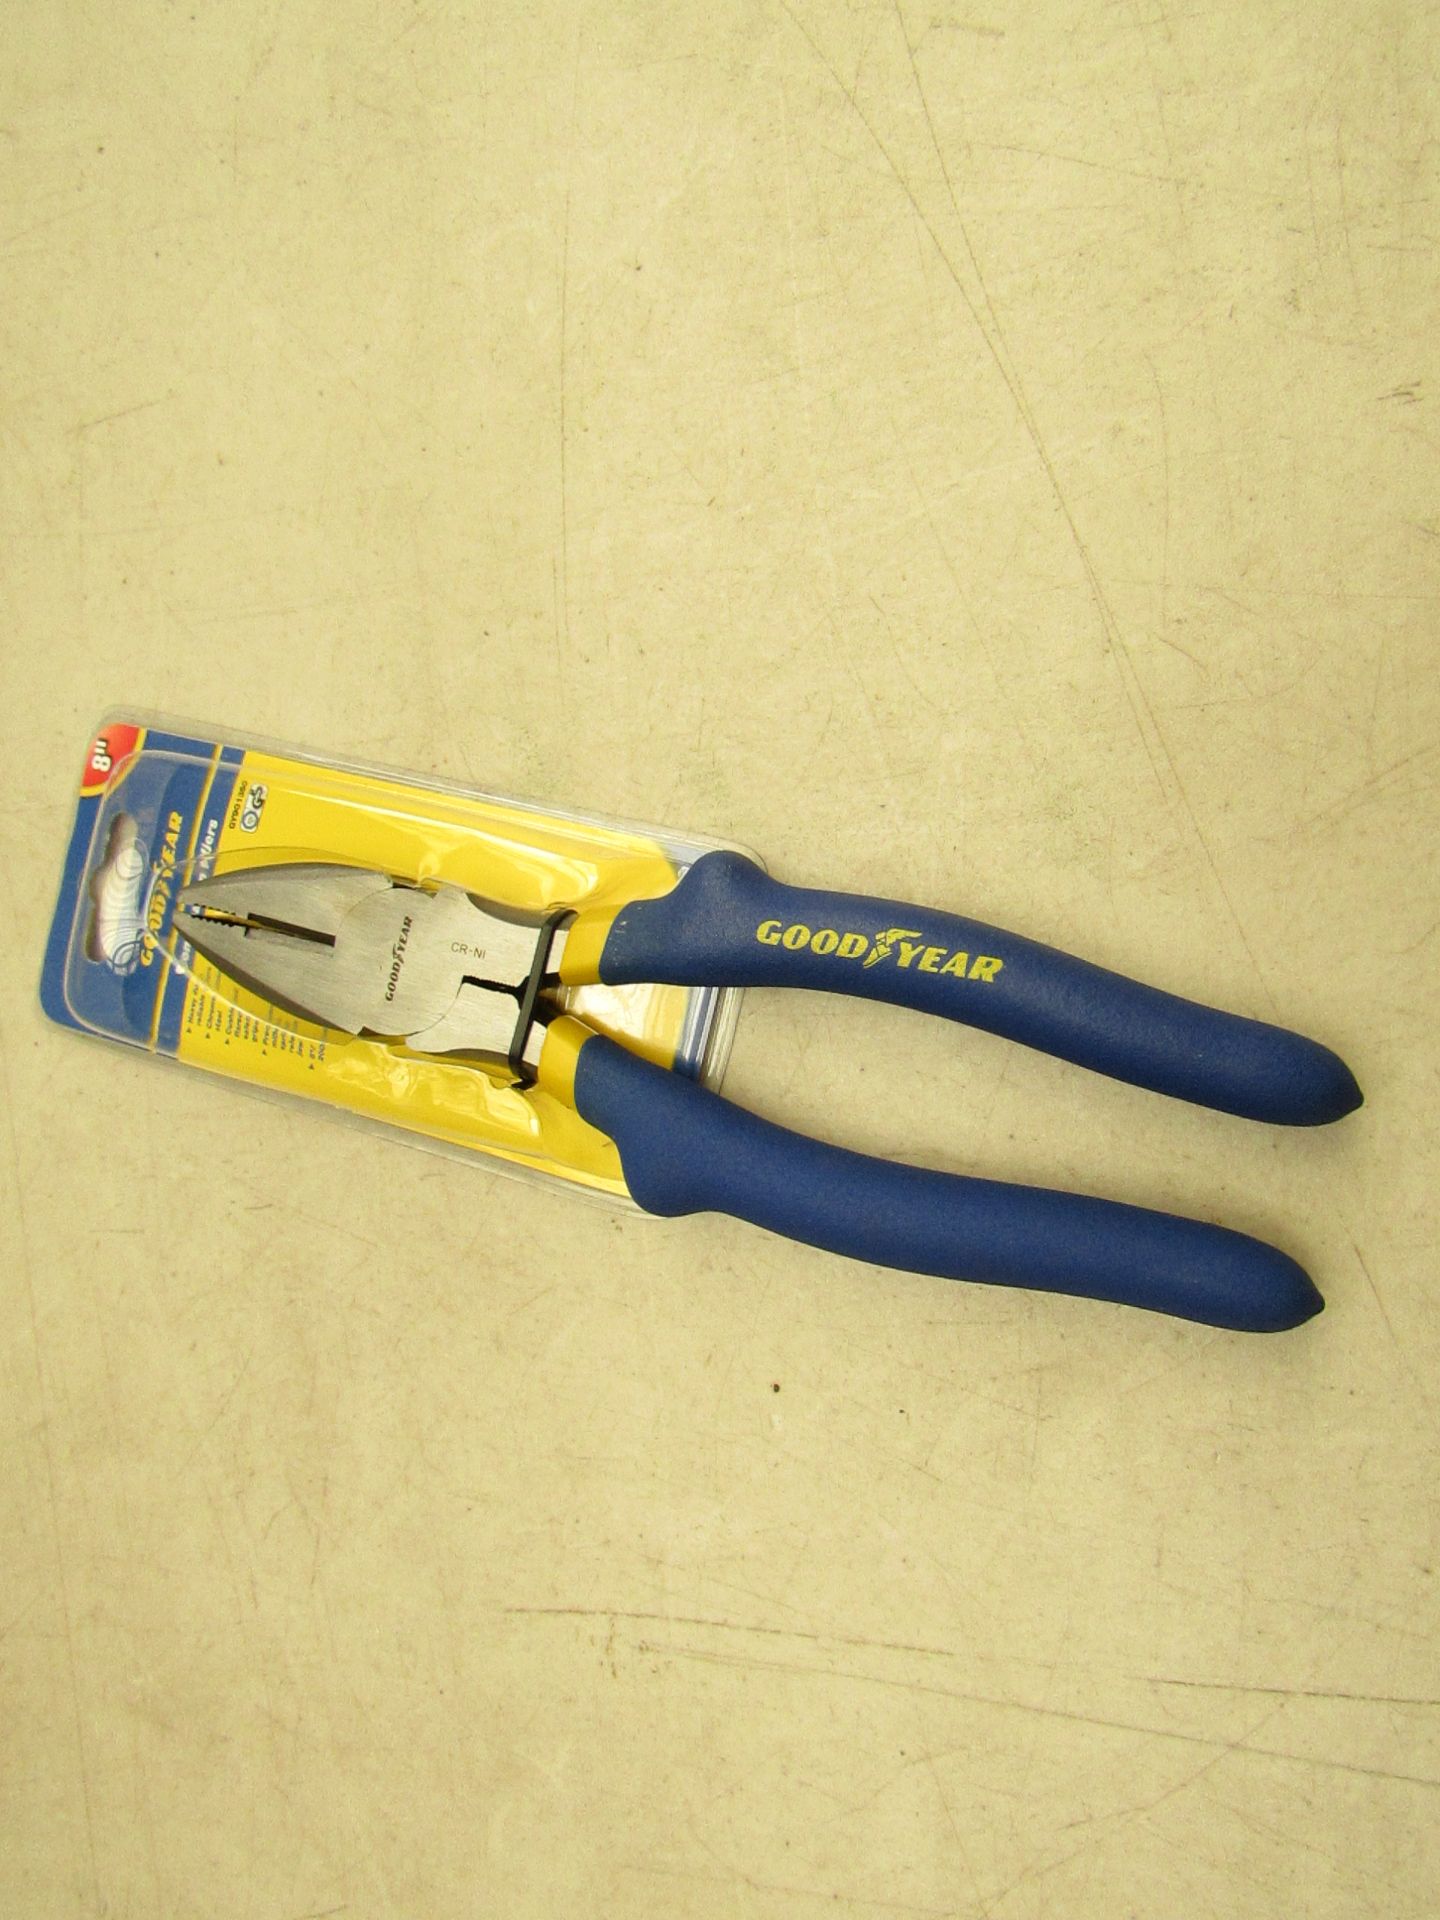 Good year 8" combination pliers, new in packaging